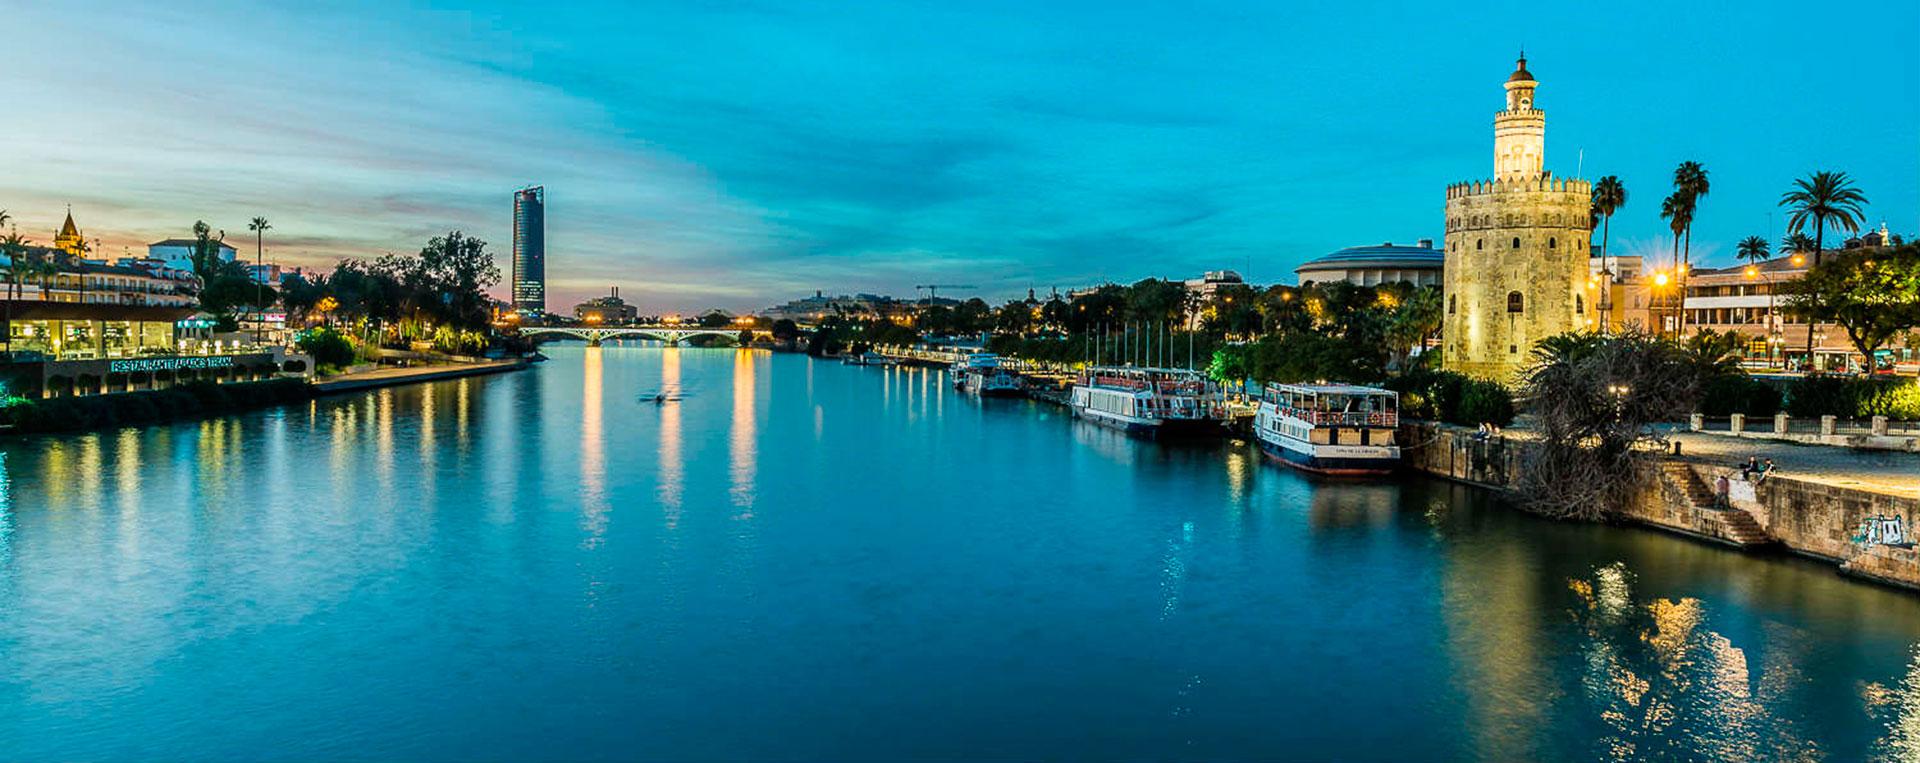 Cover image of this place Guadalquivir